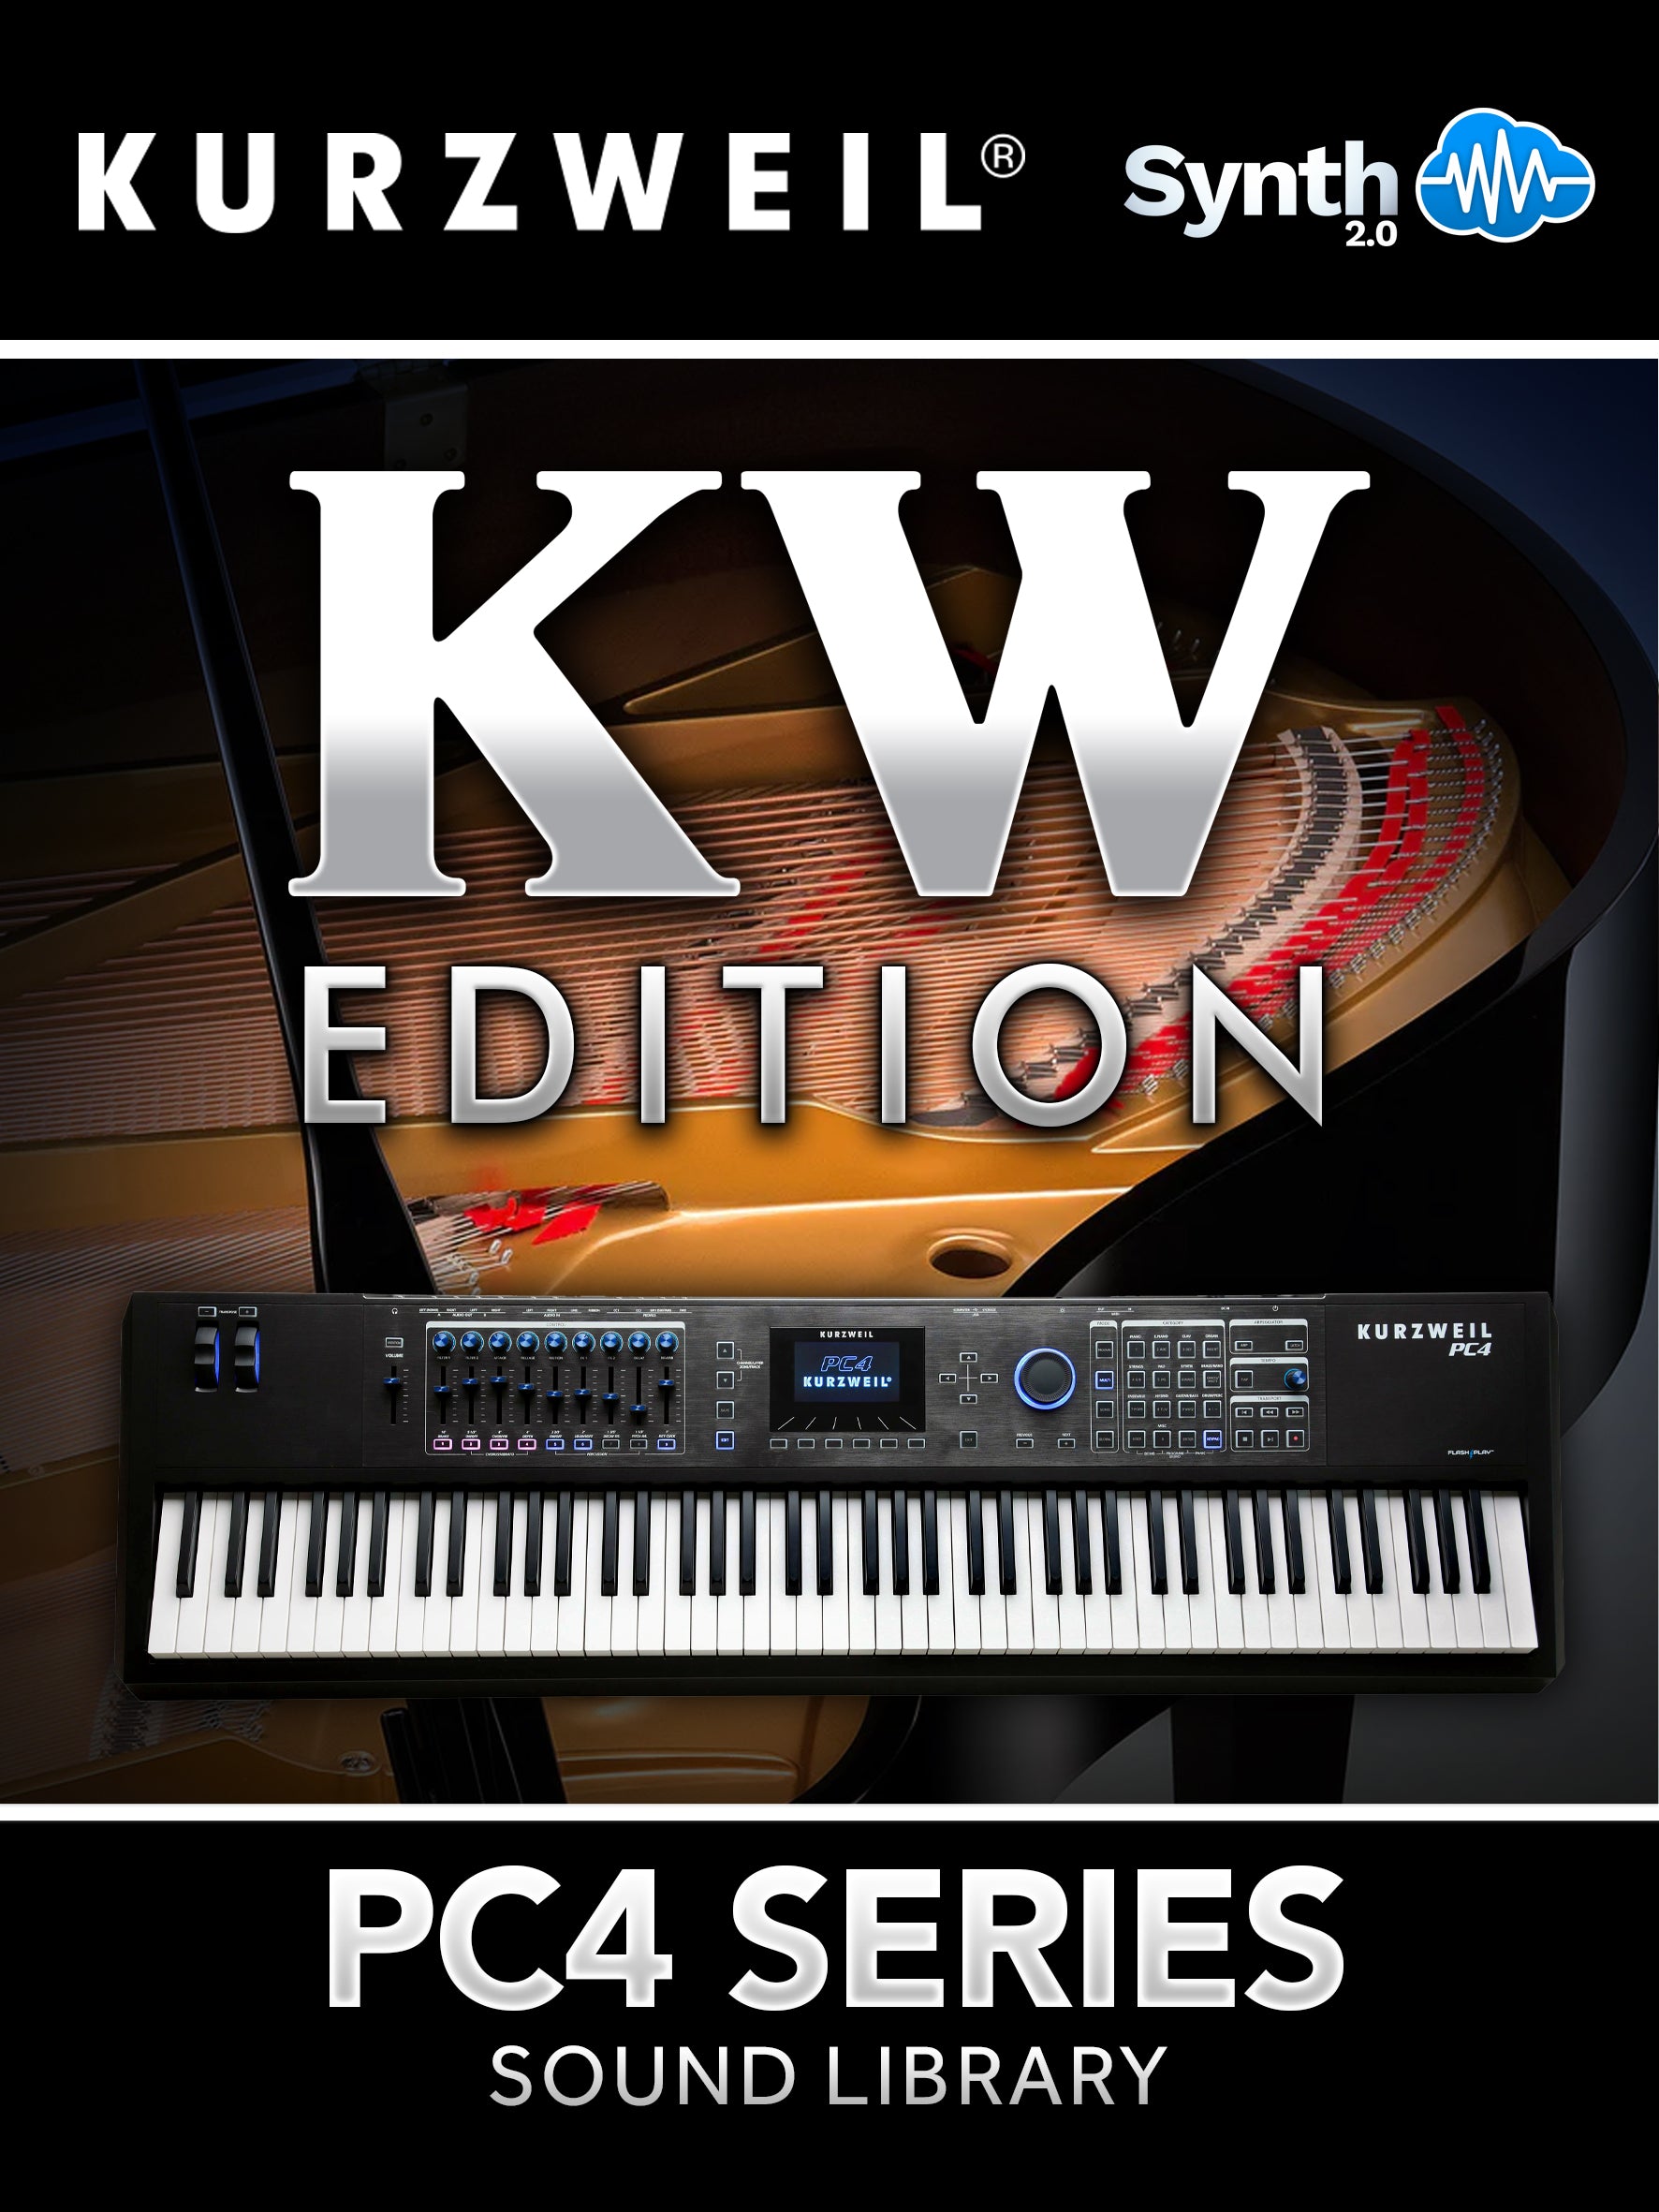 DRS009 - Contemporary Pianos KW Edition - Kurzweil PC4 Series ( 4 presets )